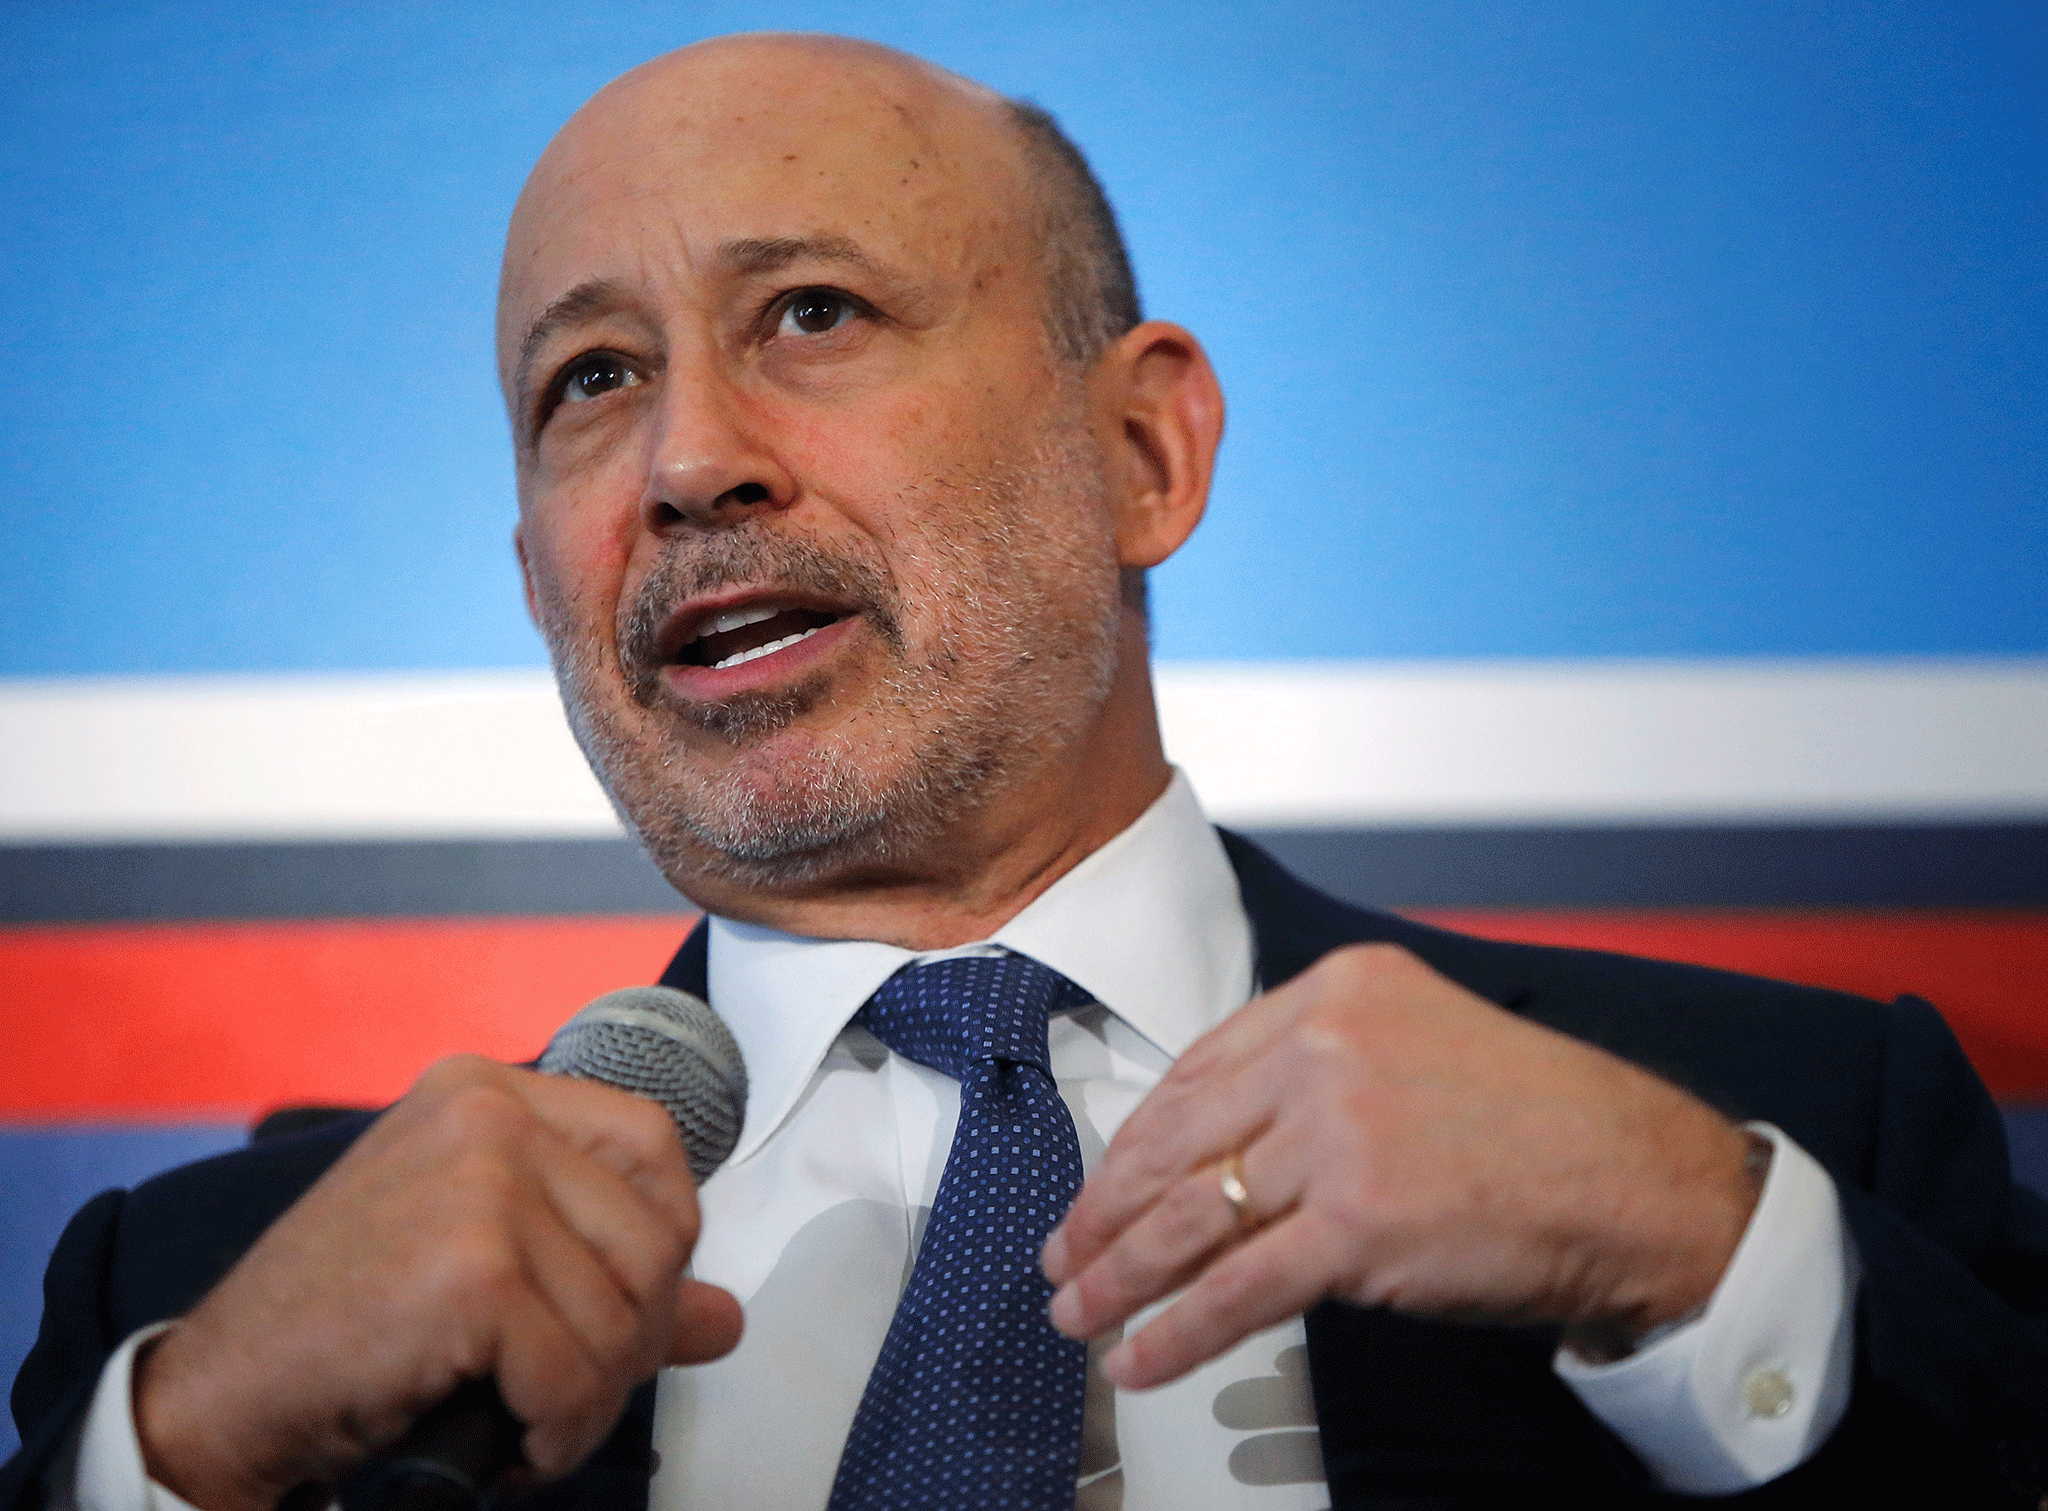 Goldman Sachs CEO Lloyd Blankfein said: 'This is not a policy we support'